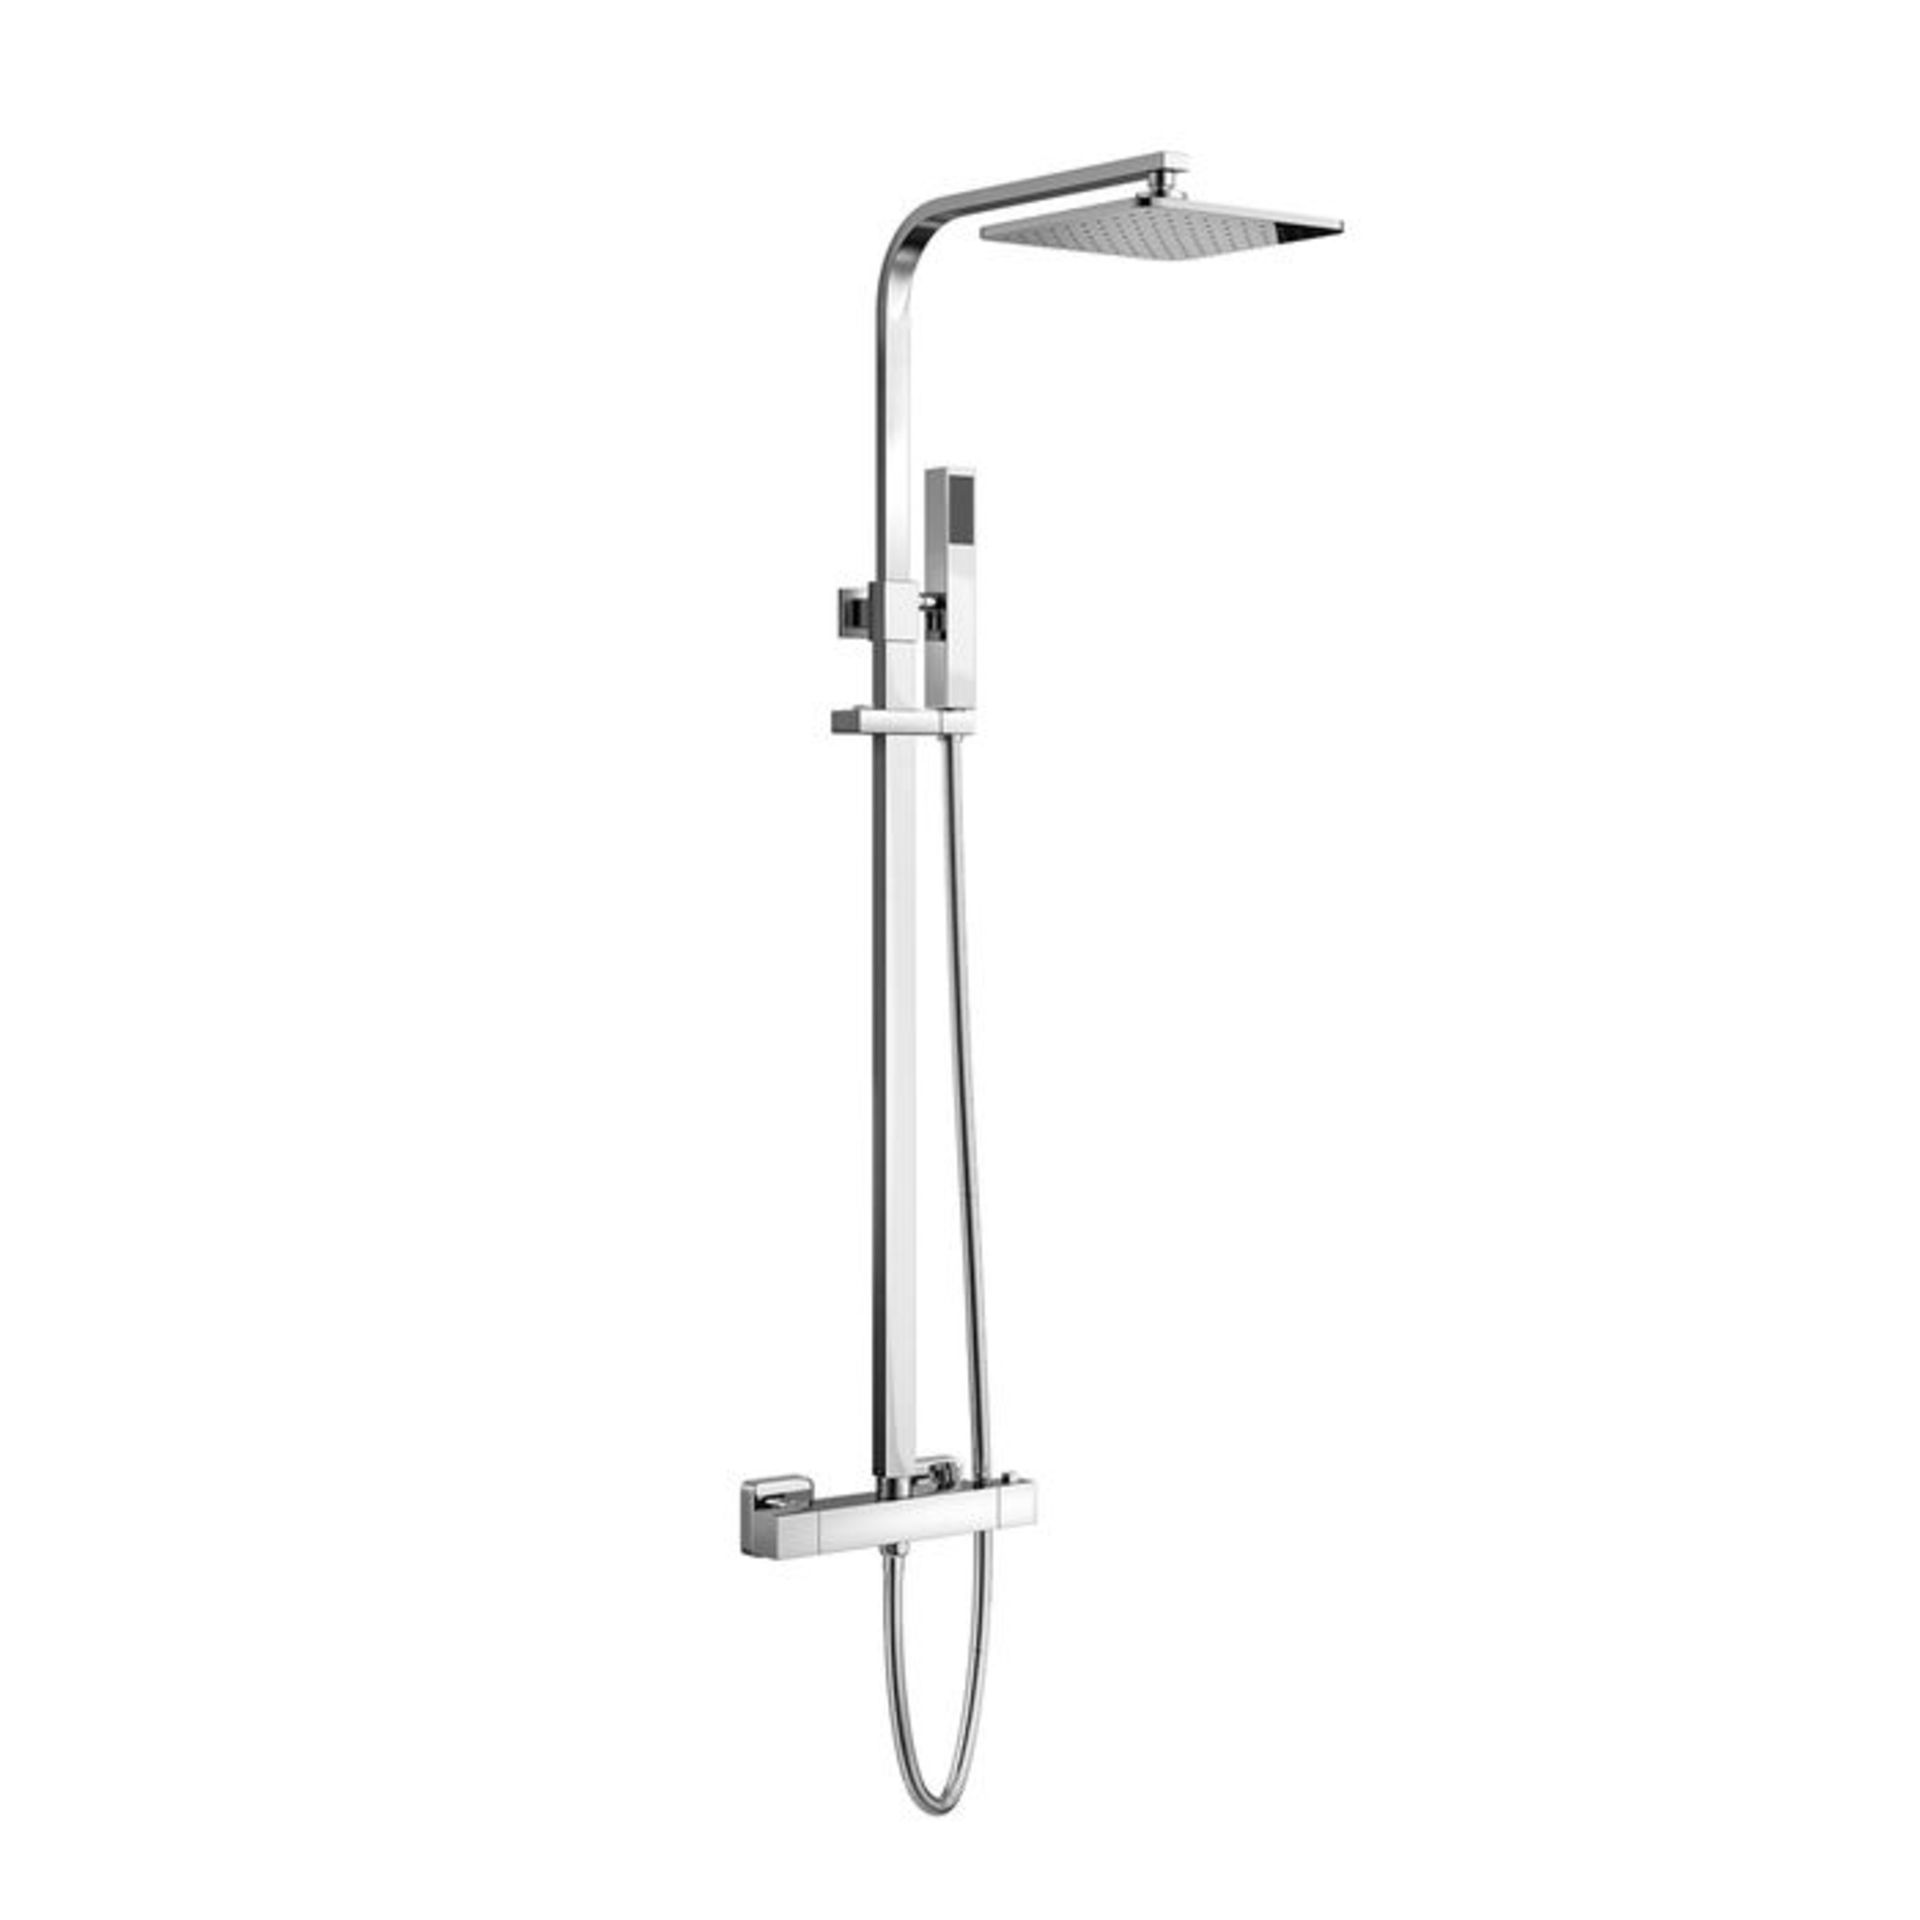 (UK261) Square Exposed Thermostatic Shower Kit & Medium Head. Angled slim and on-trend aesthetic - Image 2 of 3